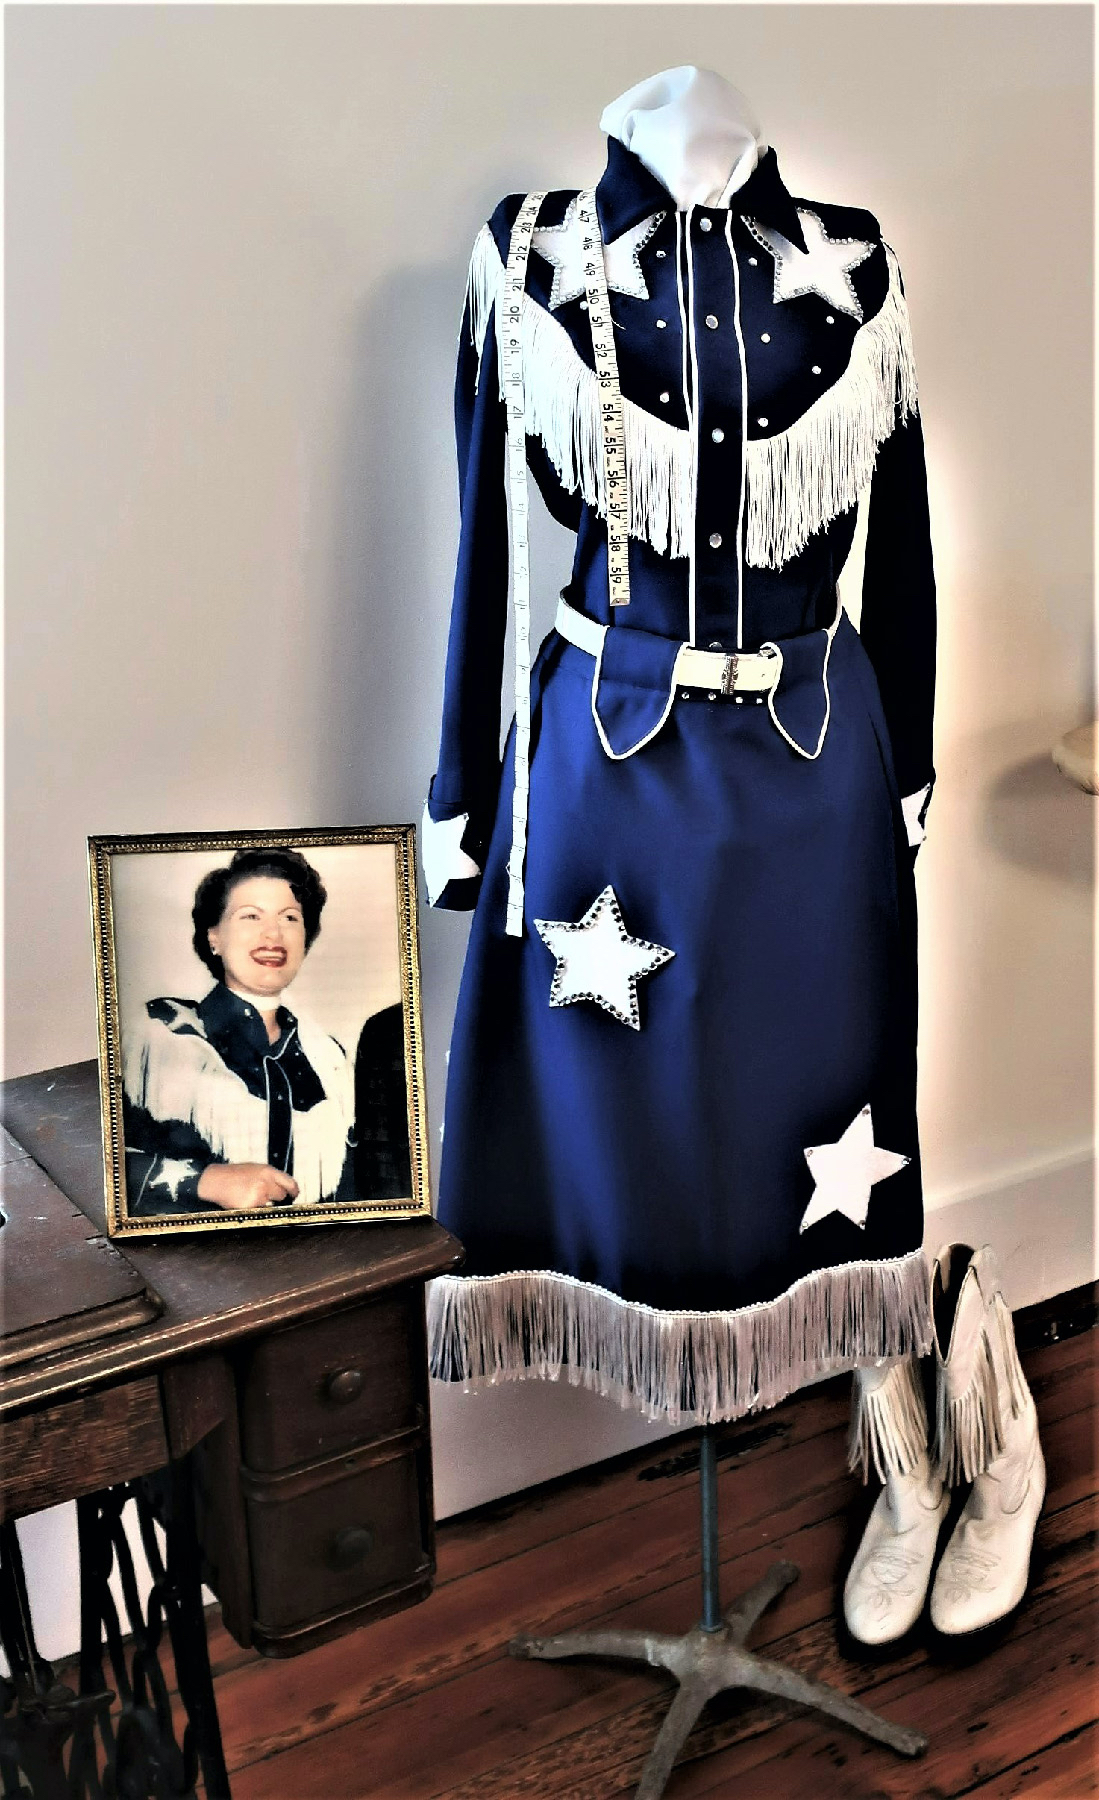 A portrait and outfit of Patsy Cline on display